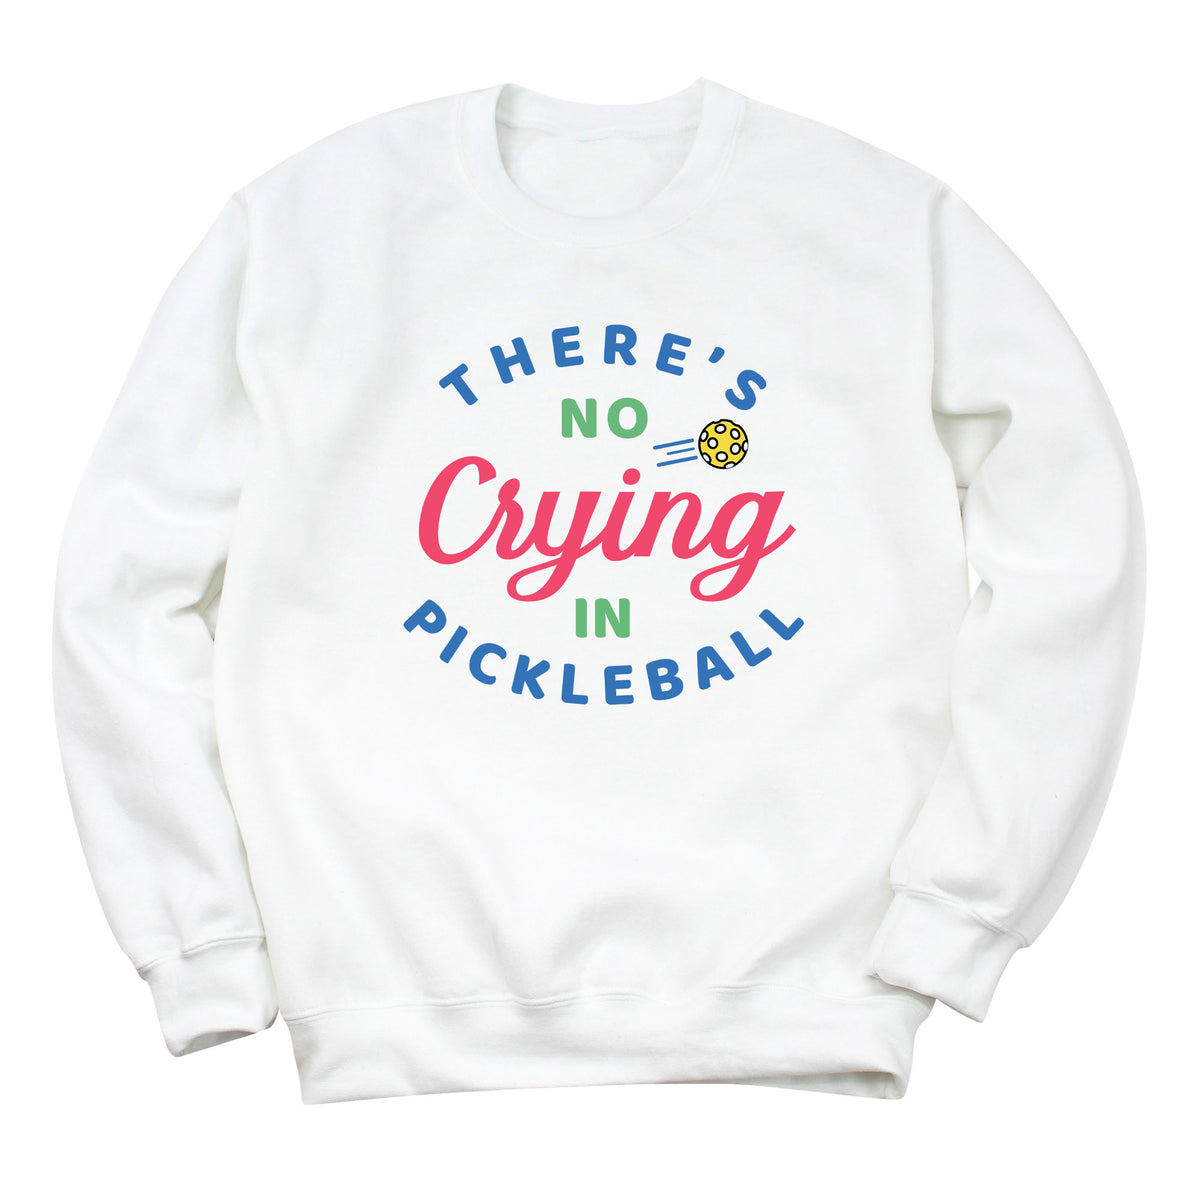 There's Not Crying in Pickleball Sweatshirt